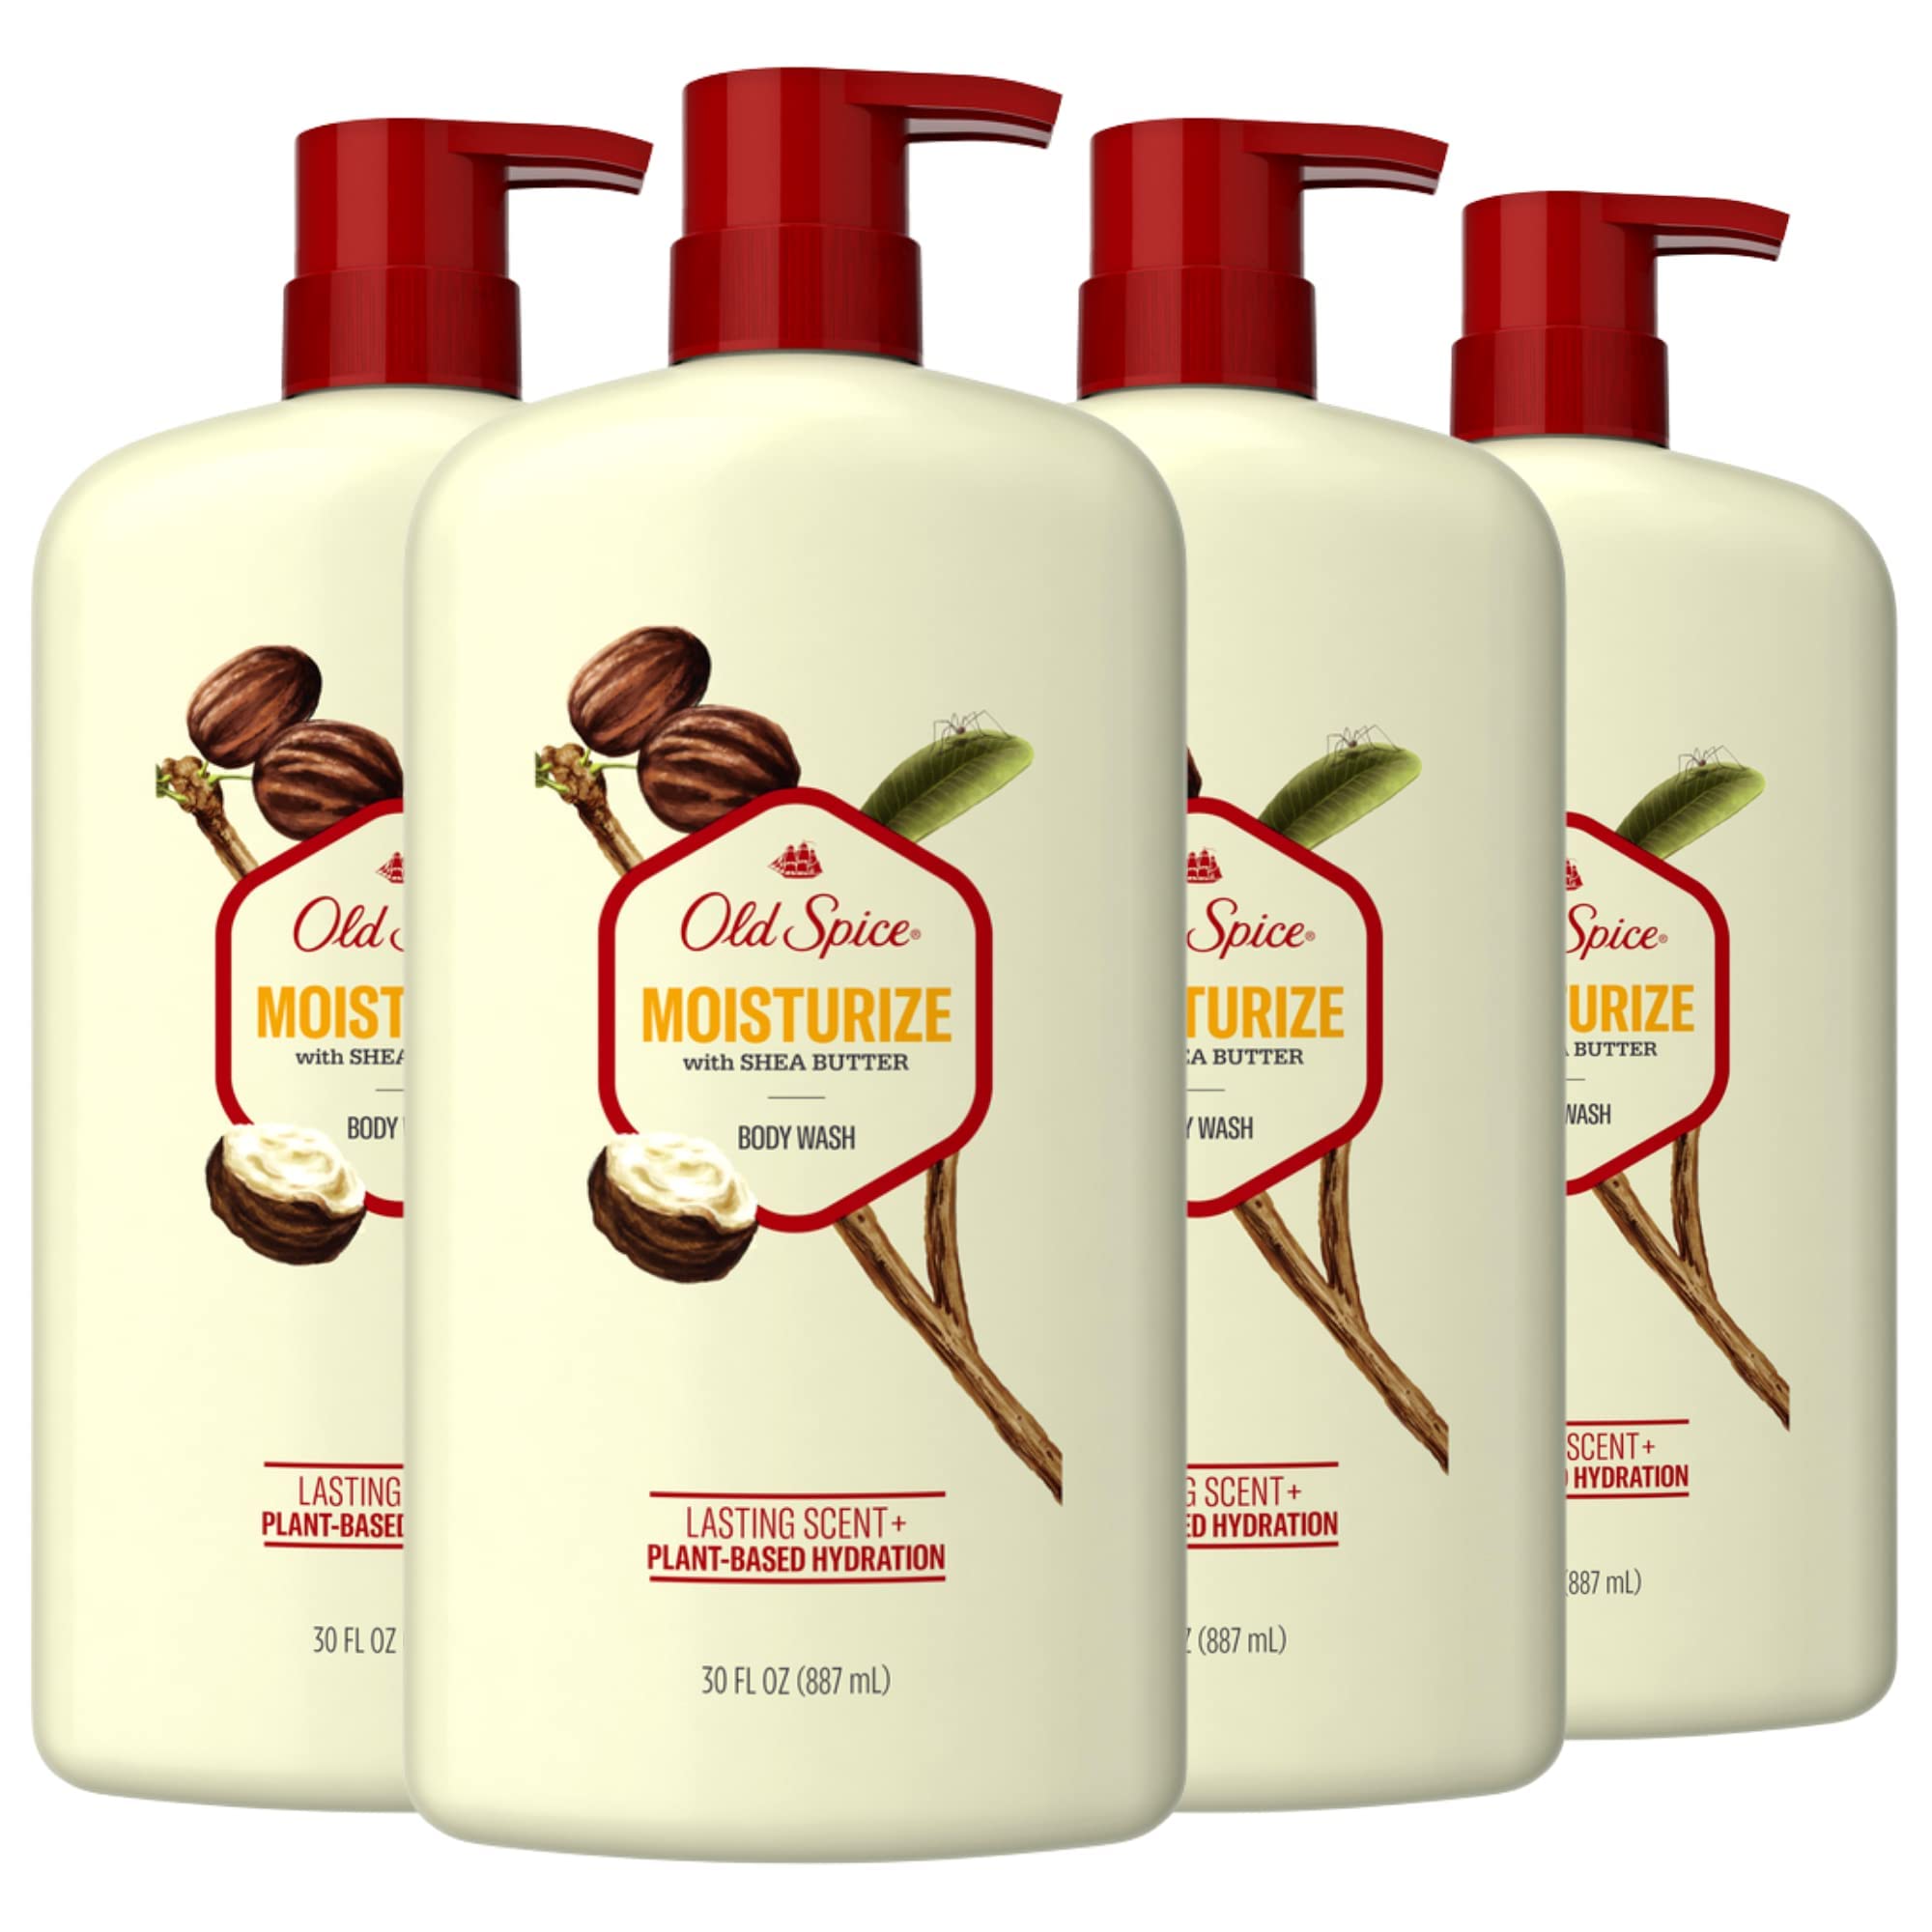 Old Spice Men's Body Wash Moisturize with Shea Butter, 30 oz (Pack of 4)